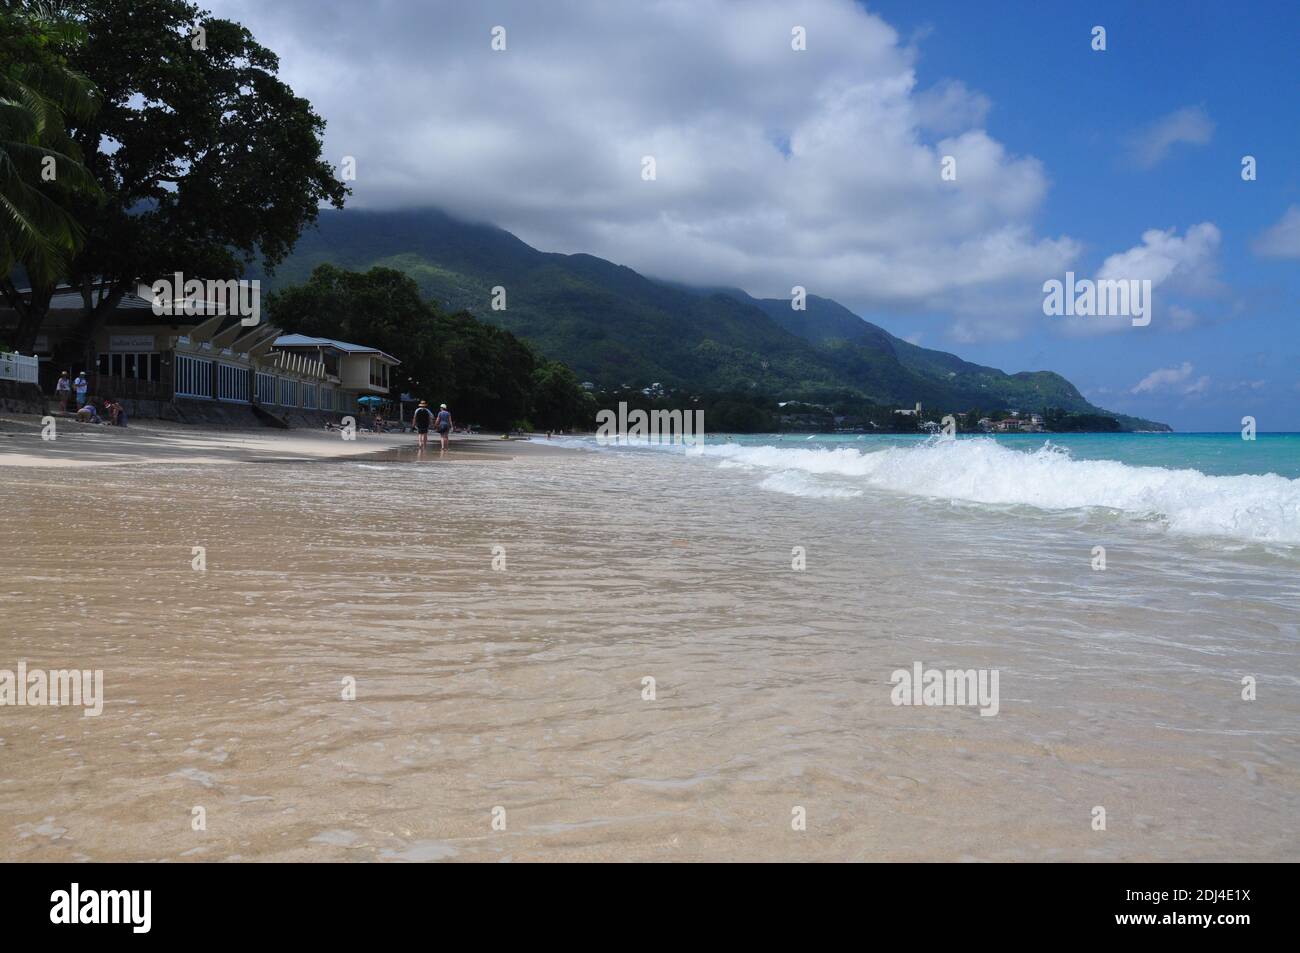 Beau vallon beach. Mahé is the largest island in the Seychelles archipelago, in the Indian Ocean off East Africa. Truly heaven on earth. Stock Photo